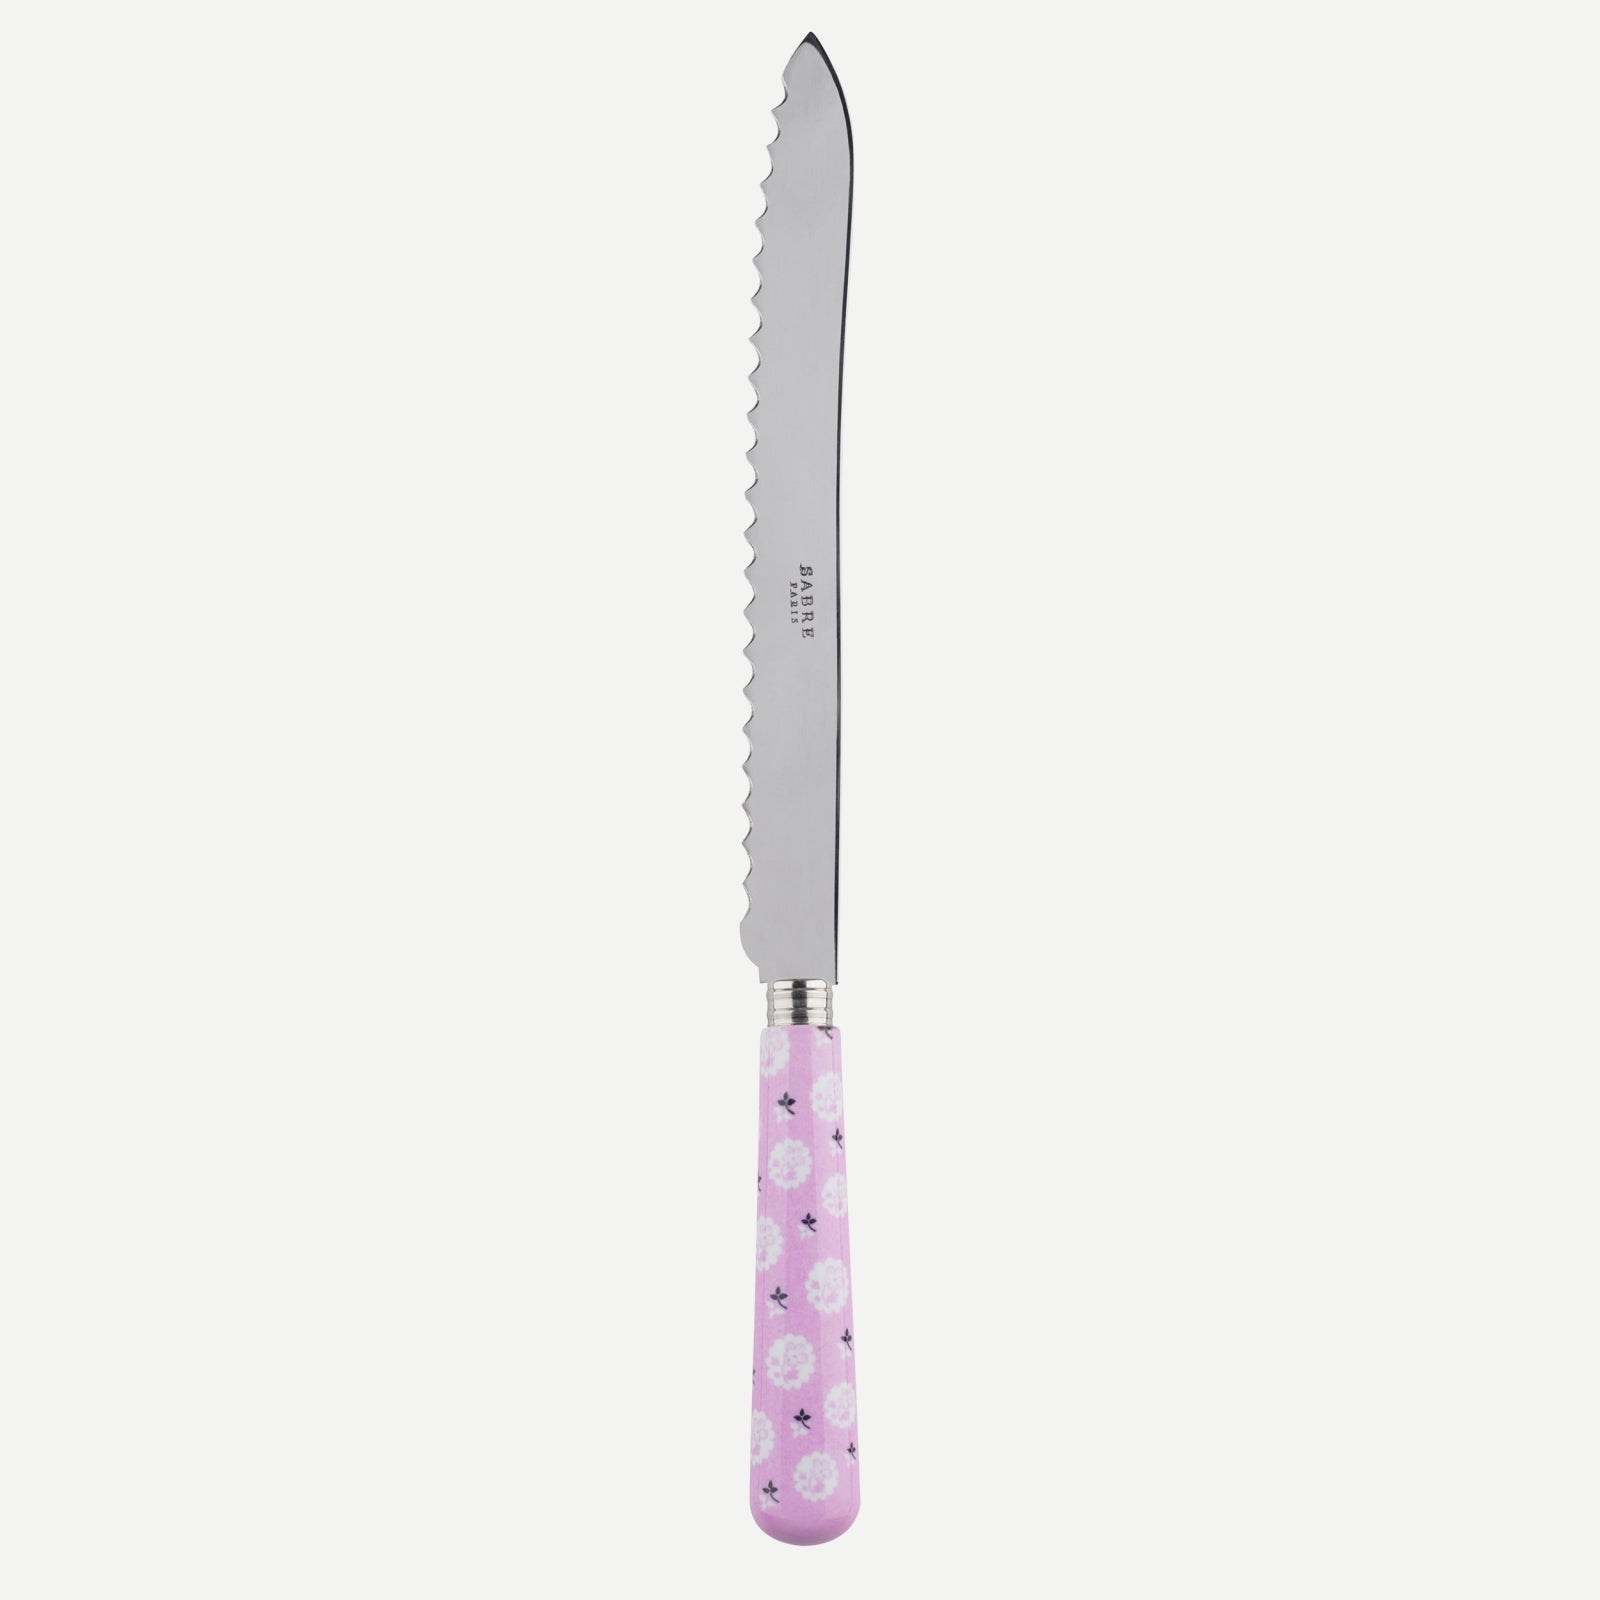 Bread knife - Provencal - Pink